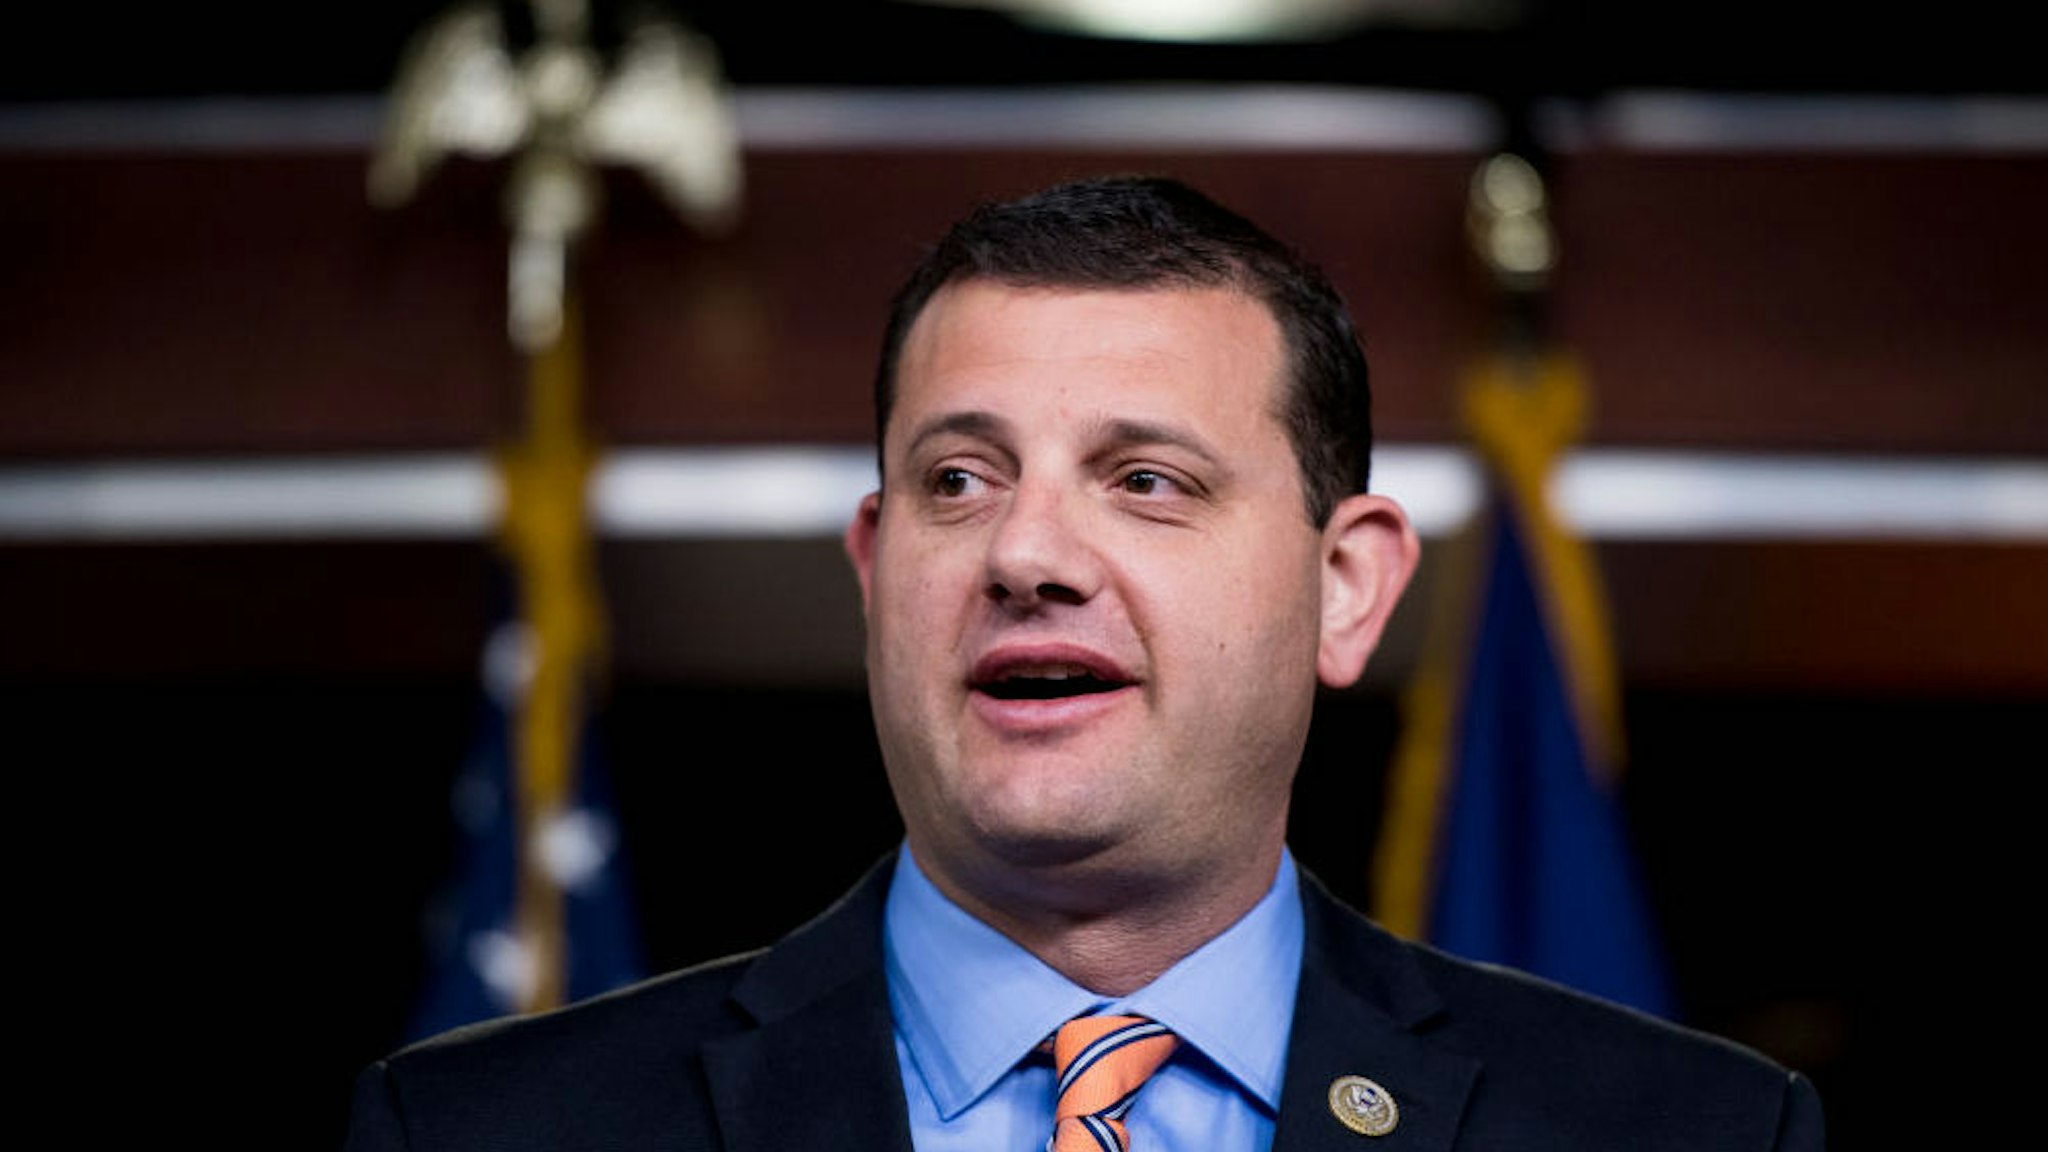 UNITED STATES - JANUARY 16: Rep. David Valadao, R-Calif., participates in a news conference on bipartisan legislation to address the Deferred Action for Childhood Arrivals (DACA) program and border security on Tuesday, Jan. 16, 2018.